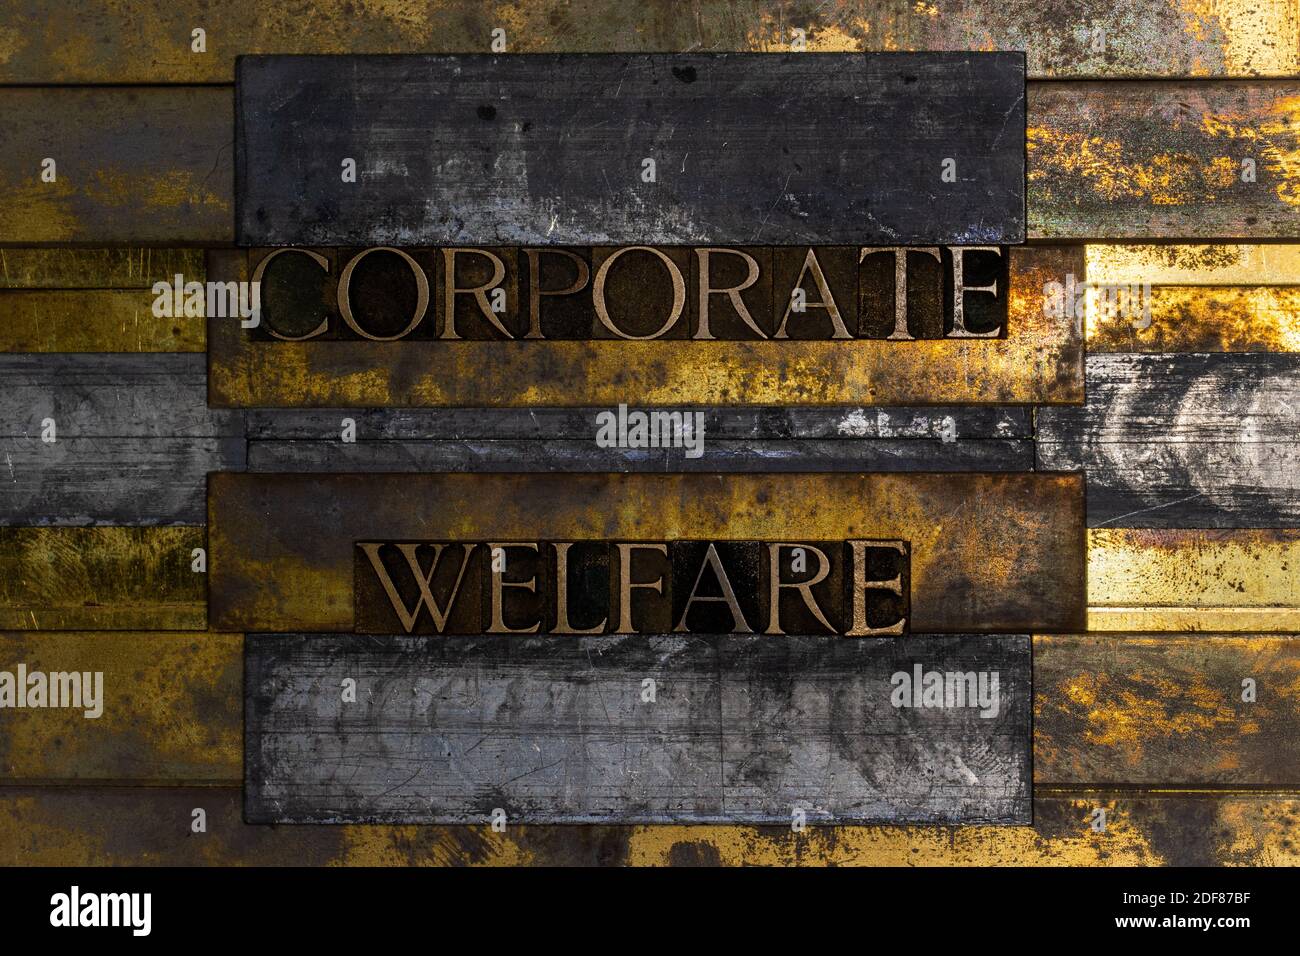 Corporate Welfare text formed by real authentic typeset letters on vintage textured grunge bronze background Stock Photo